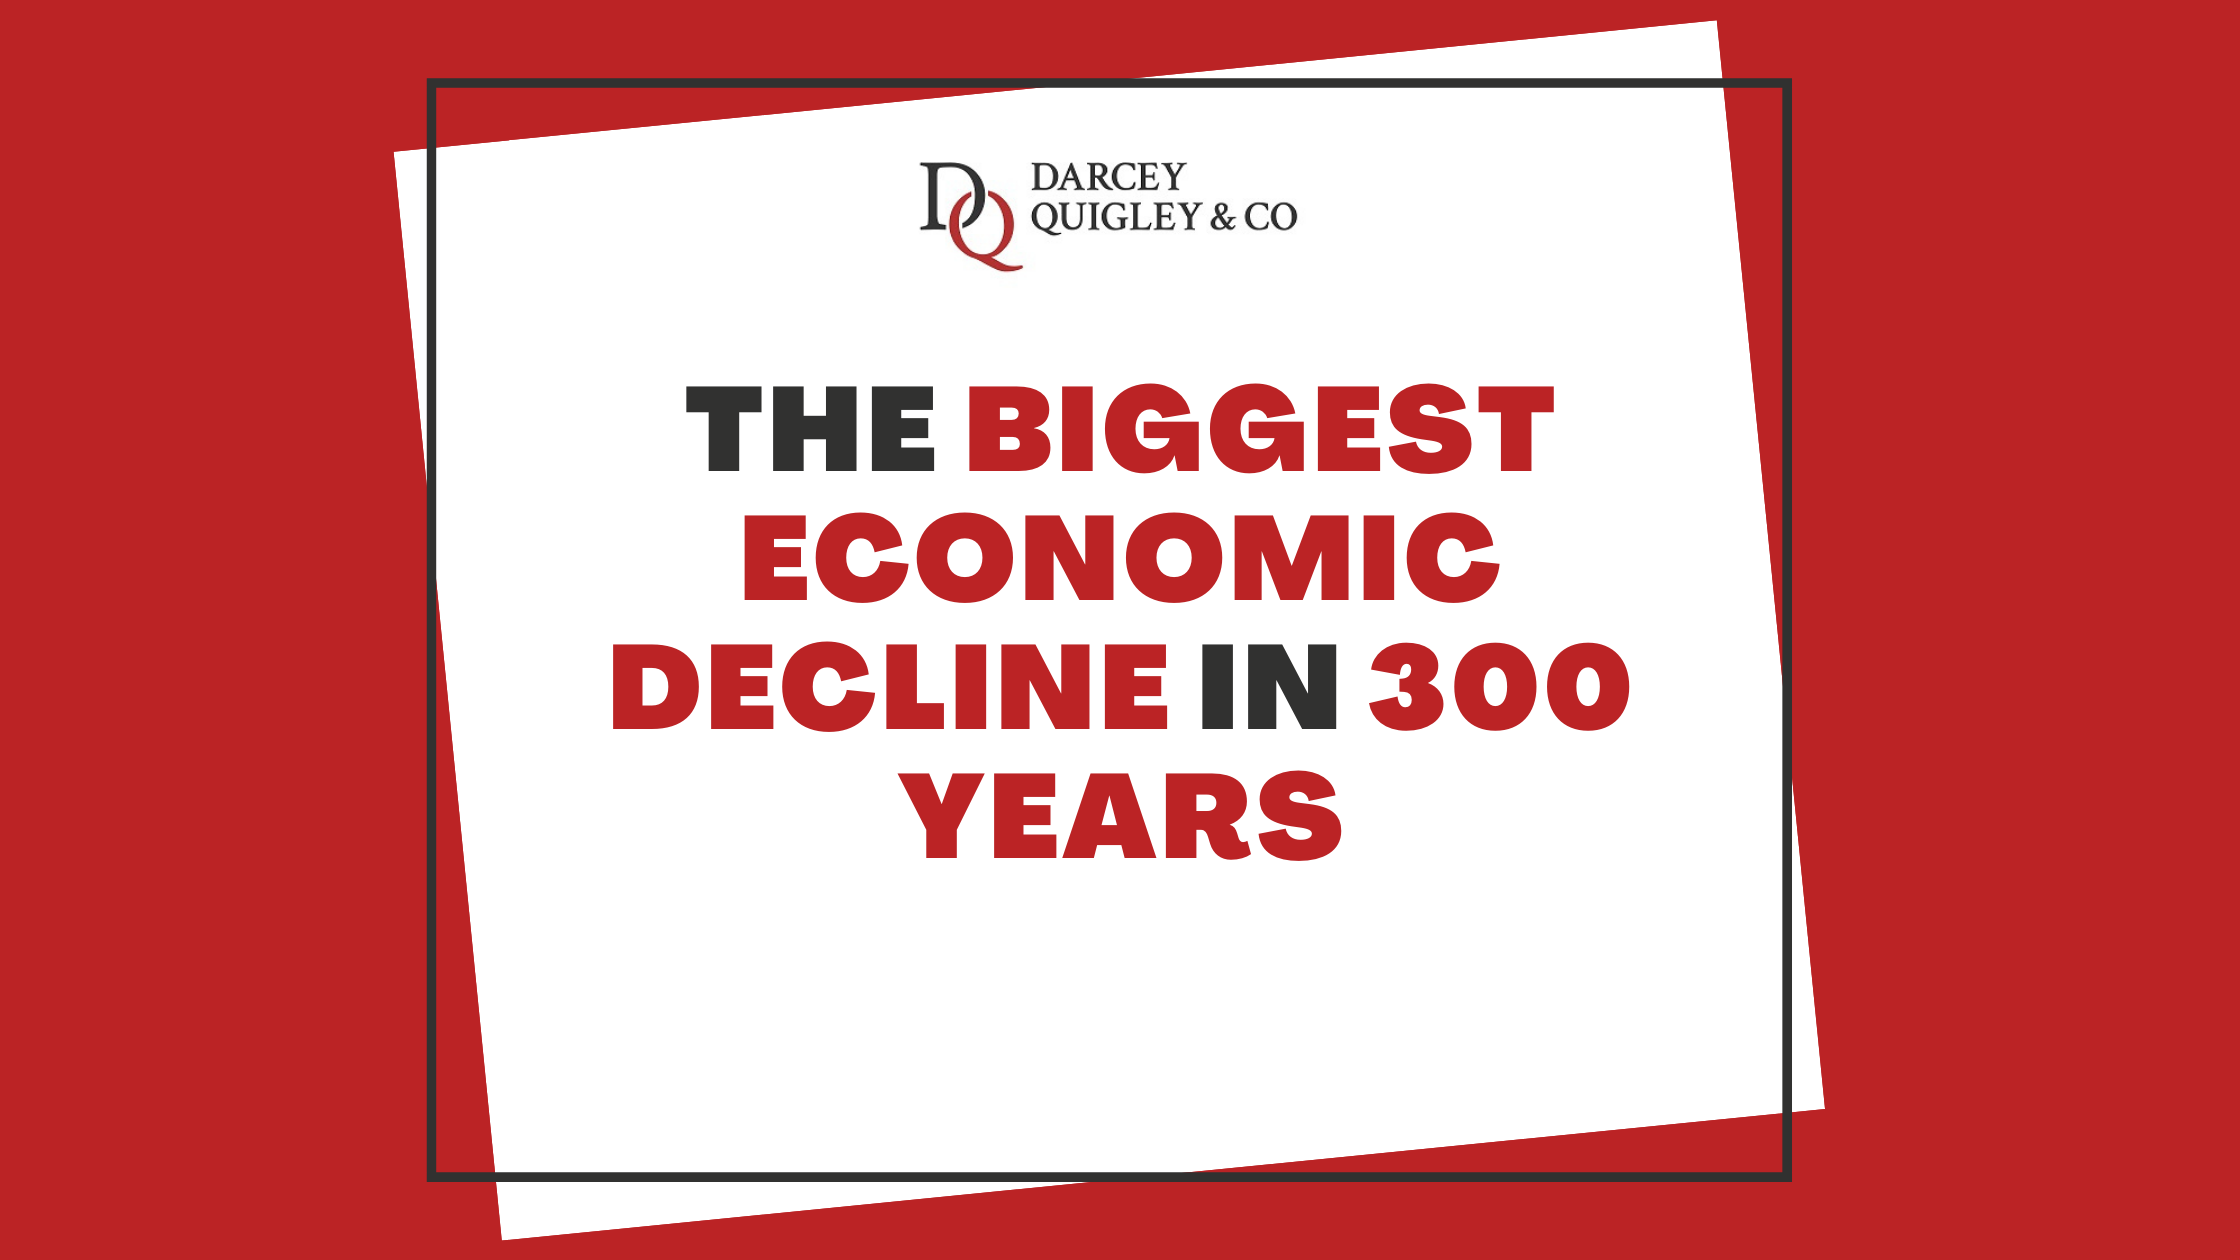 The Biggest Economic Decline in 300 Years